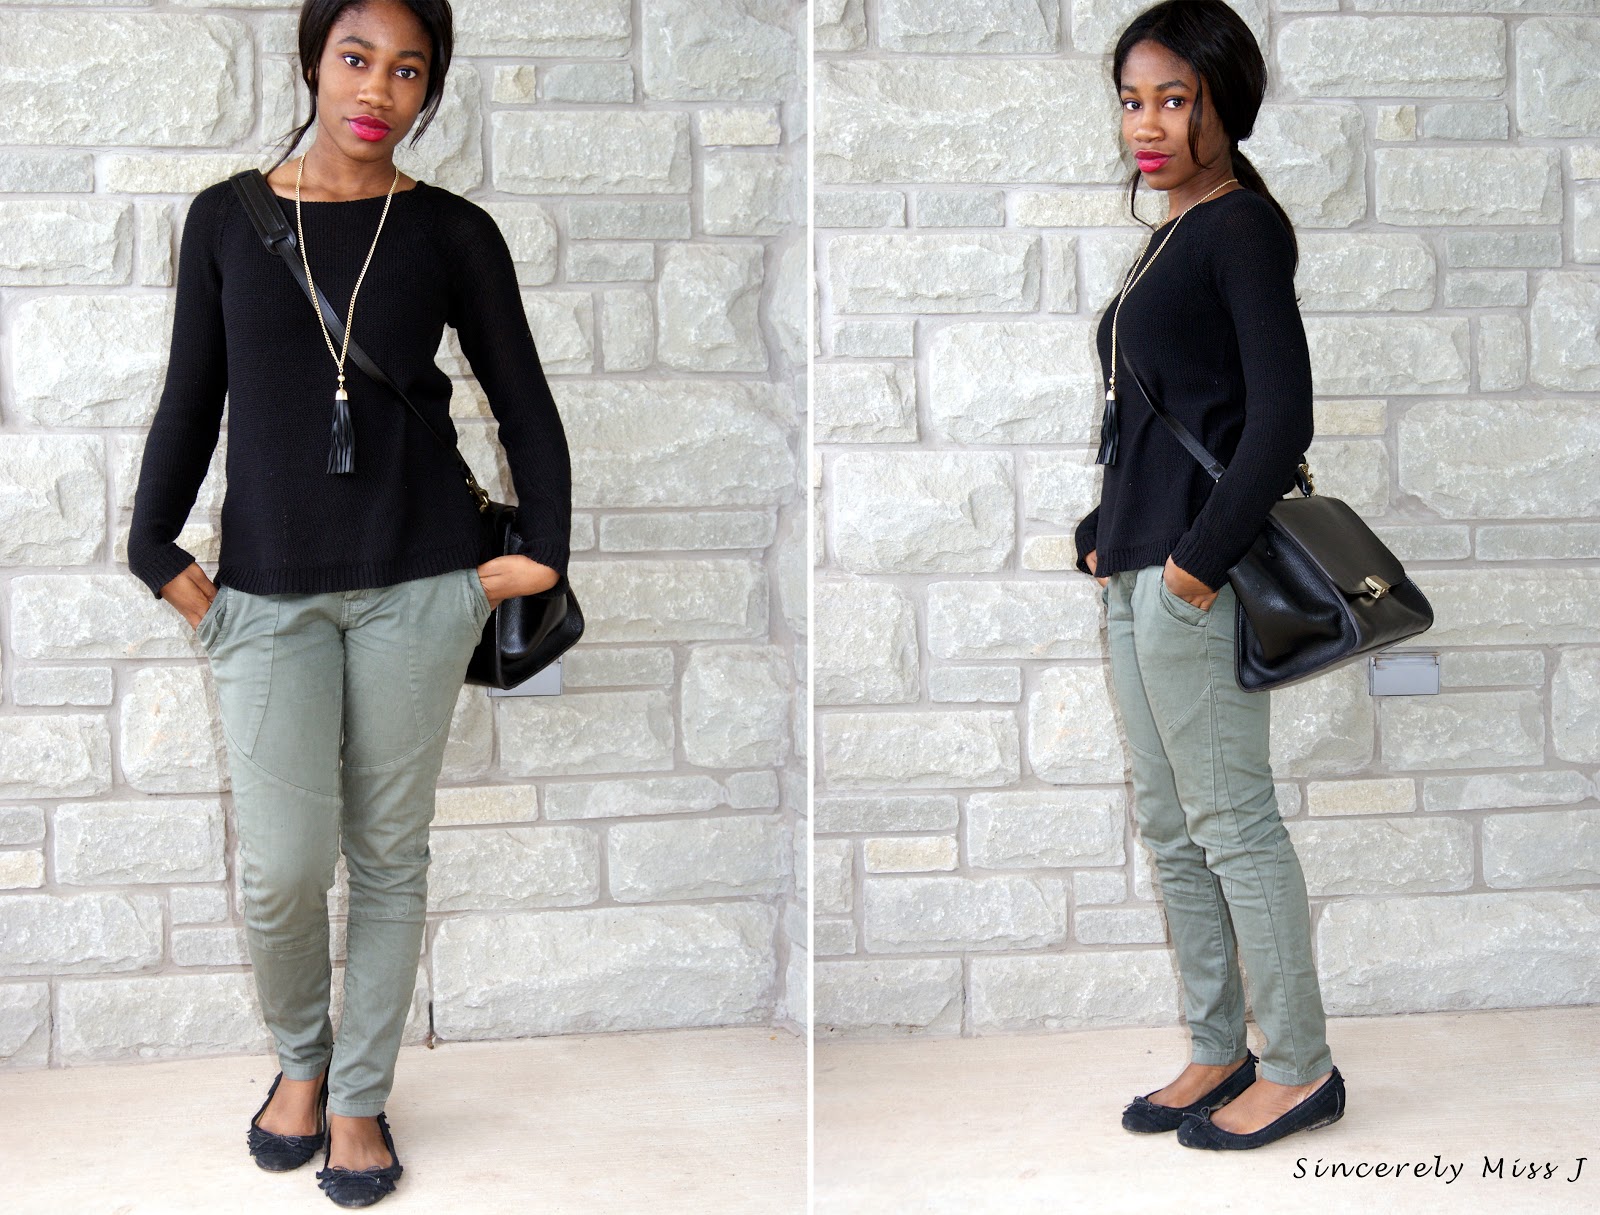 Outfit Information: Sweater & Necklace: Dynamite, Vest: thrifted: DIY, Pants: Urban Behaviour, Heels: Style Sense